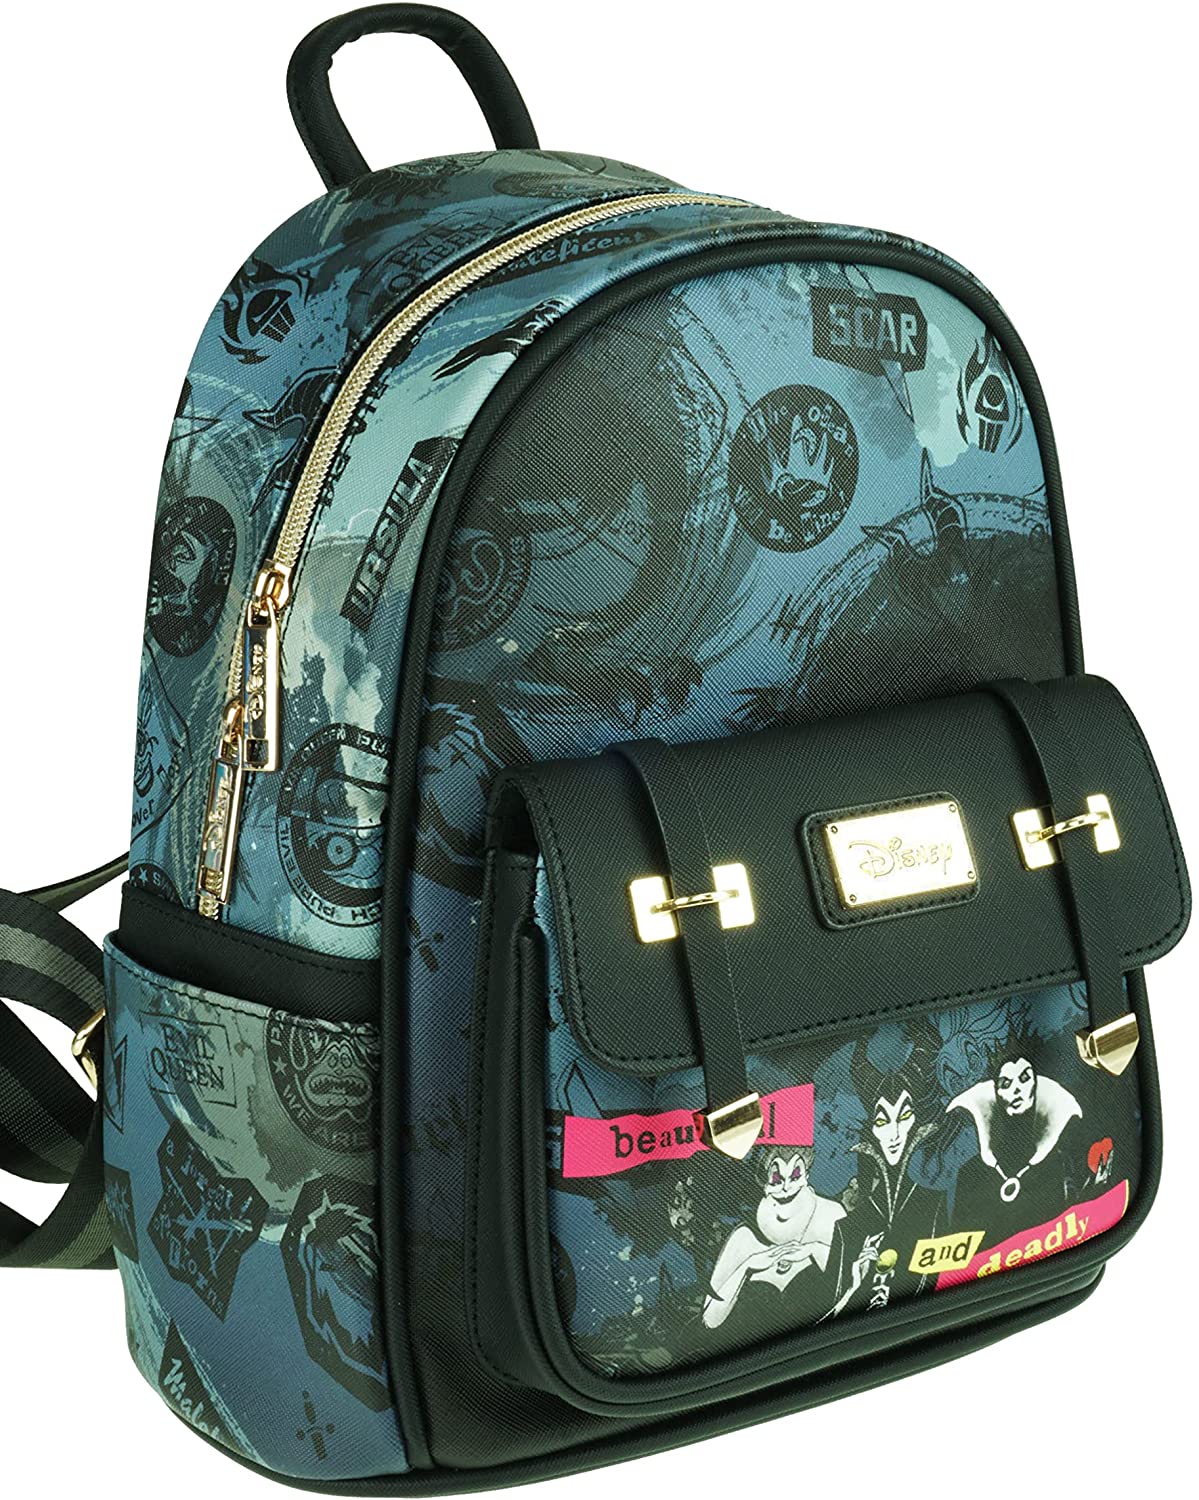 Villains 11" Vegan Leather Mini Backpack - A21805 - GTE Zone